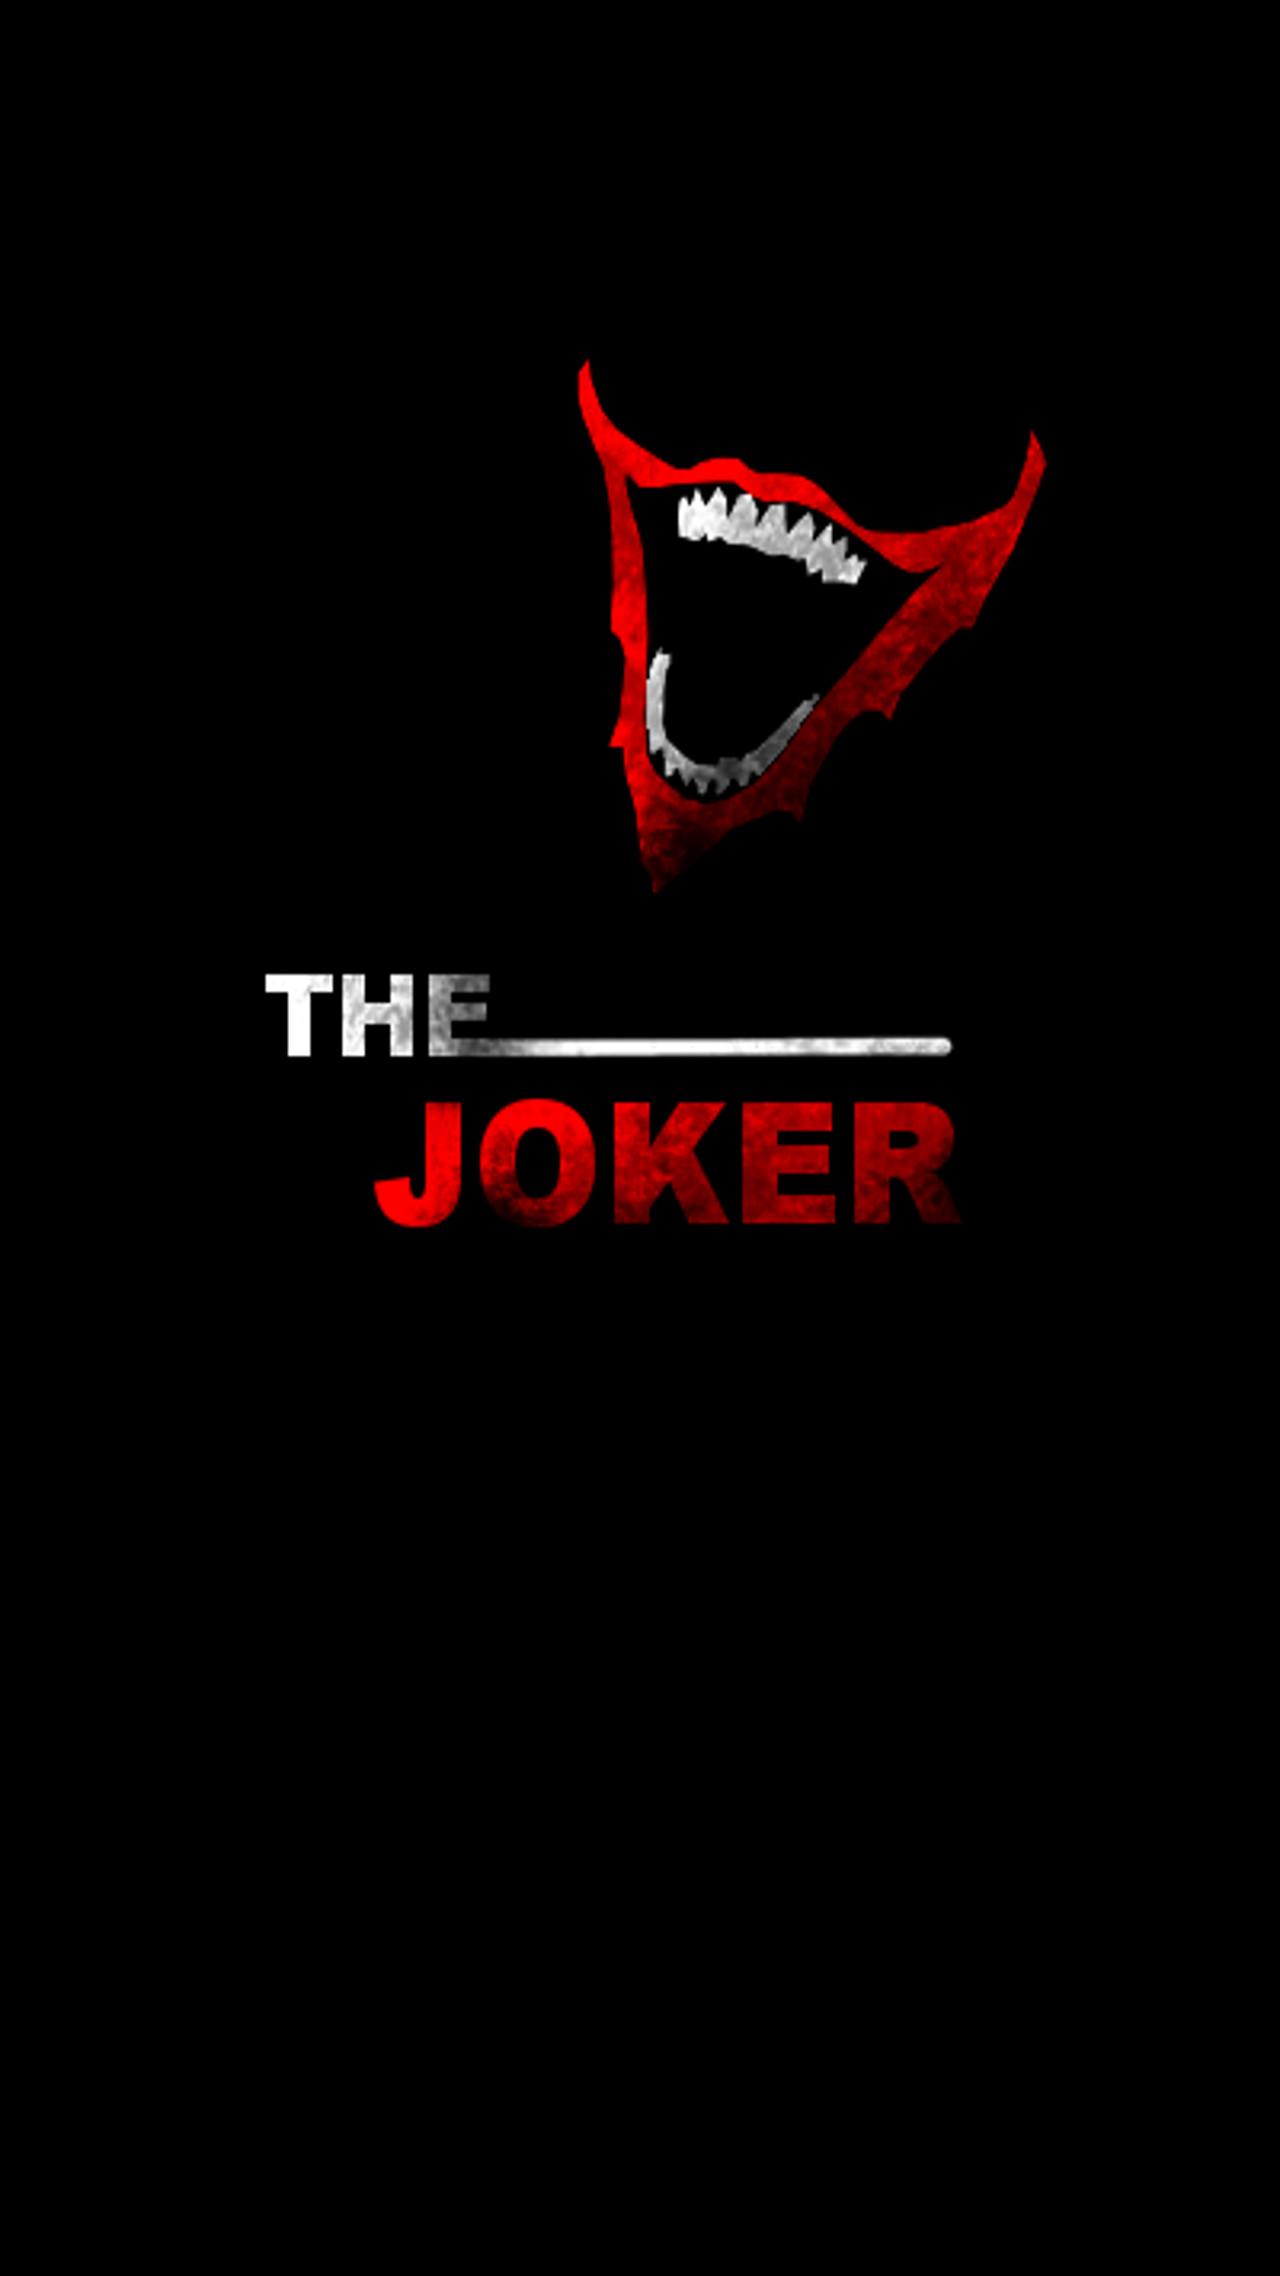 Download Joker And Harley Black And Red 4K Gotham Wallpaper | Wallpapers.com